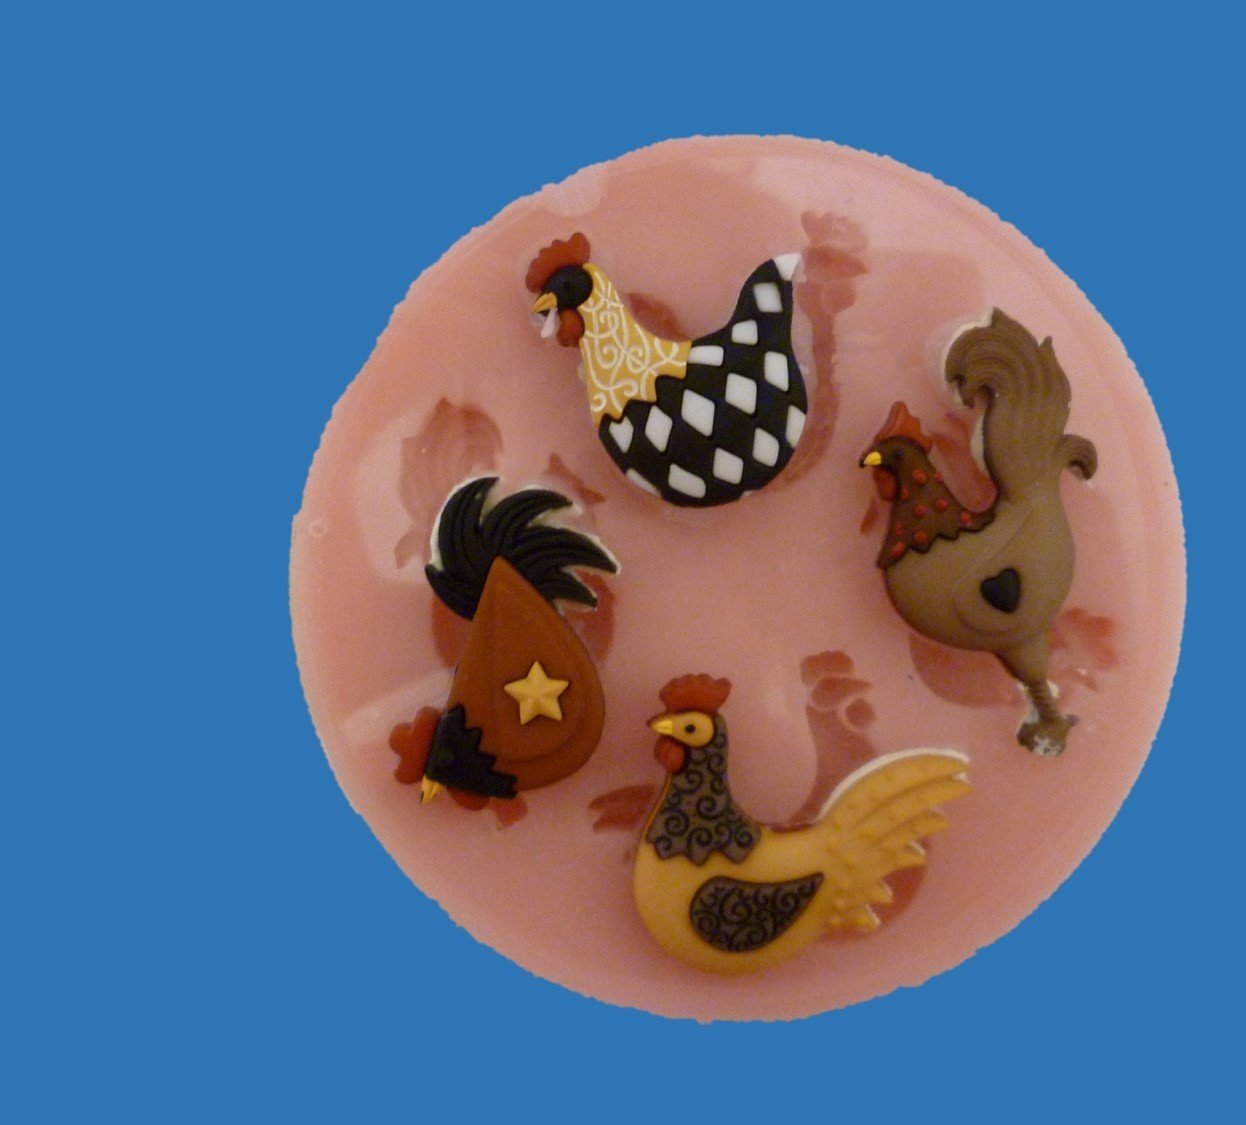 COCKERELS / HENS AND CHICKENS SILICONE MOULD